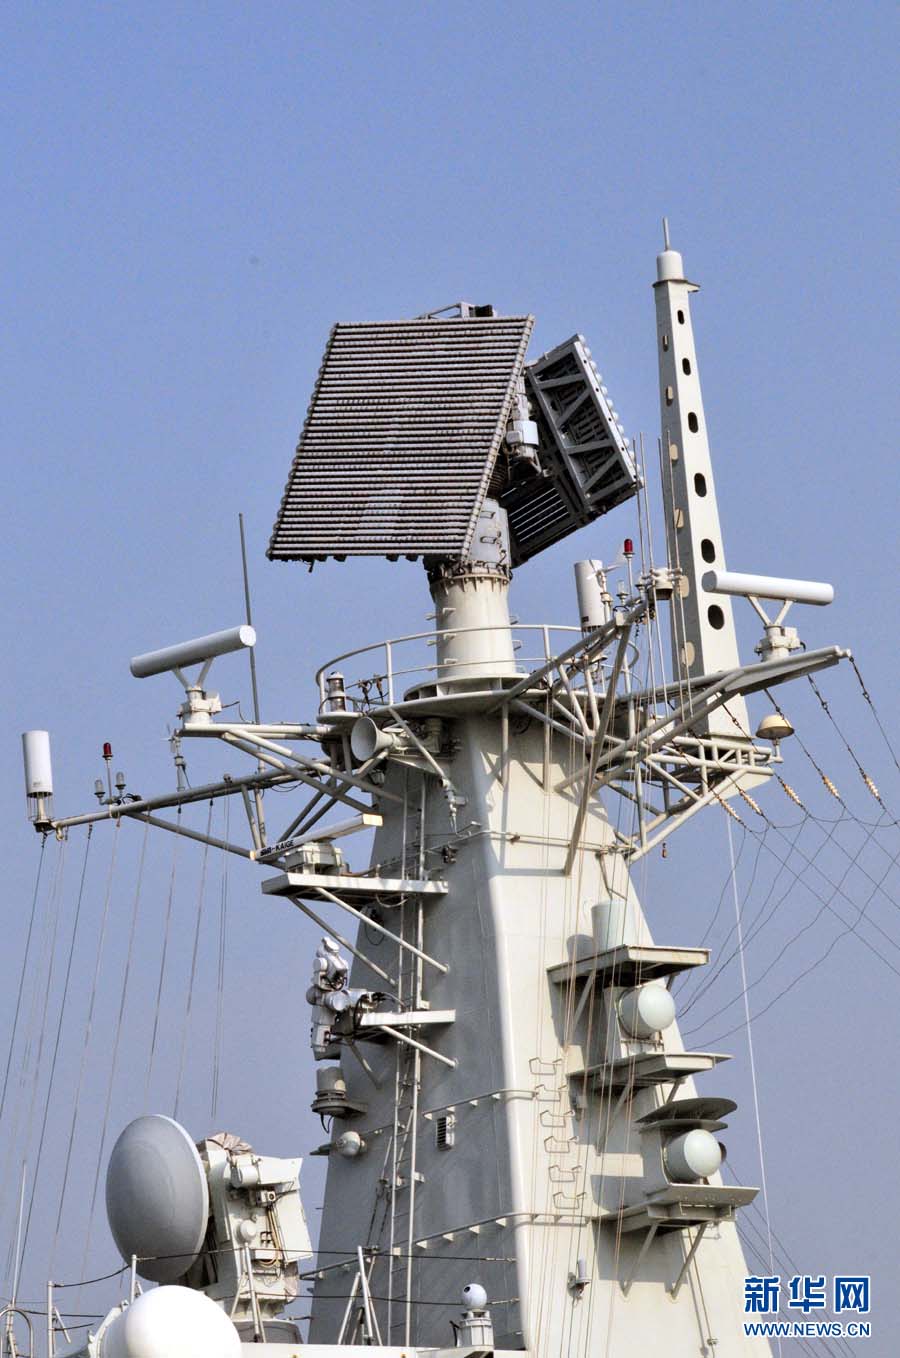 The "Guangzhou" guided missile destroyer under the South China Sea Fleet of the Navy of the Chinese People's Liberation Army (PLA) is open to the public on December 26, 2012. The photo features the scene of the main mast radar and electronic equipment. (Xinhua/An Chen)